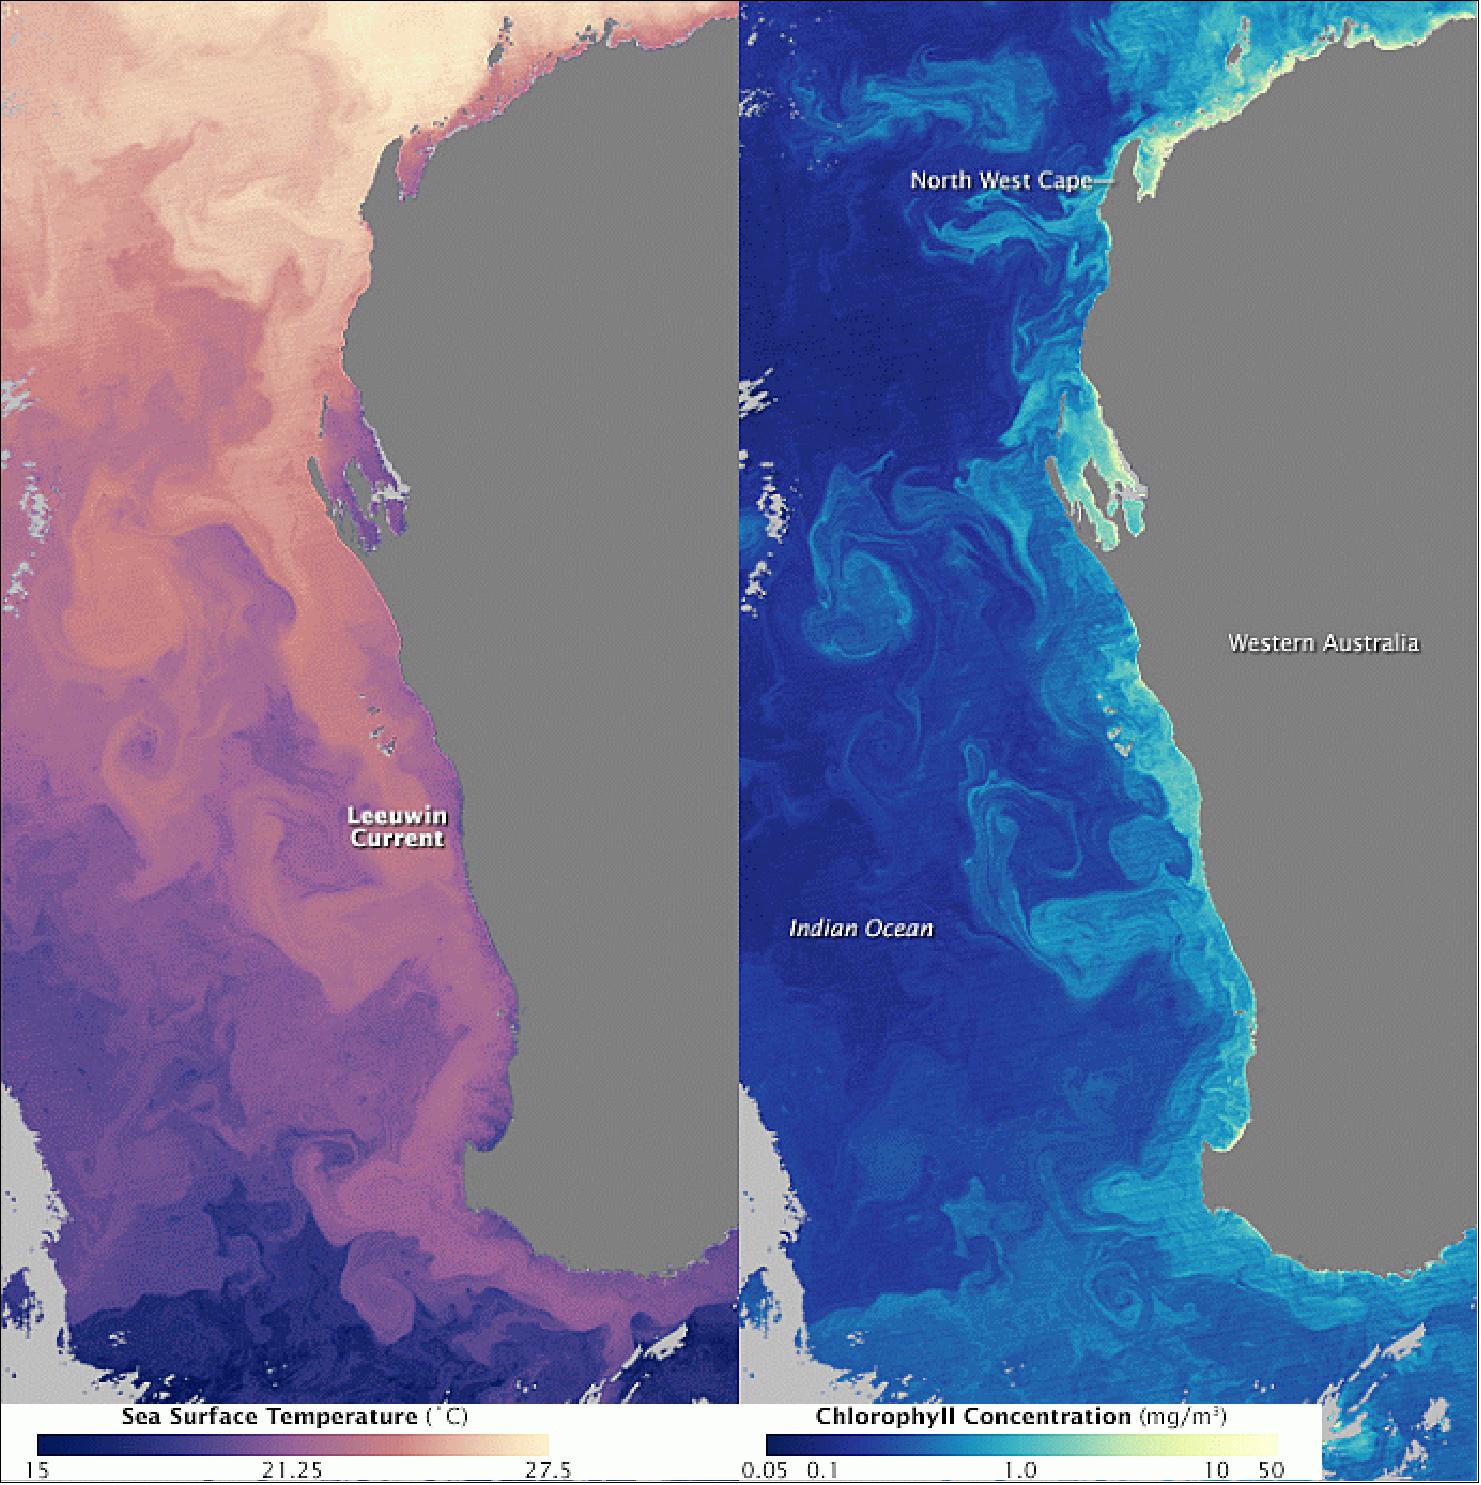 Figure 127: The two figures were acquired on June 6, 2014 with MODIS on Aqua and released on July 2, 2014 (image credit: NASA's Earth Observatory series).